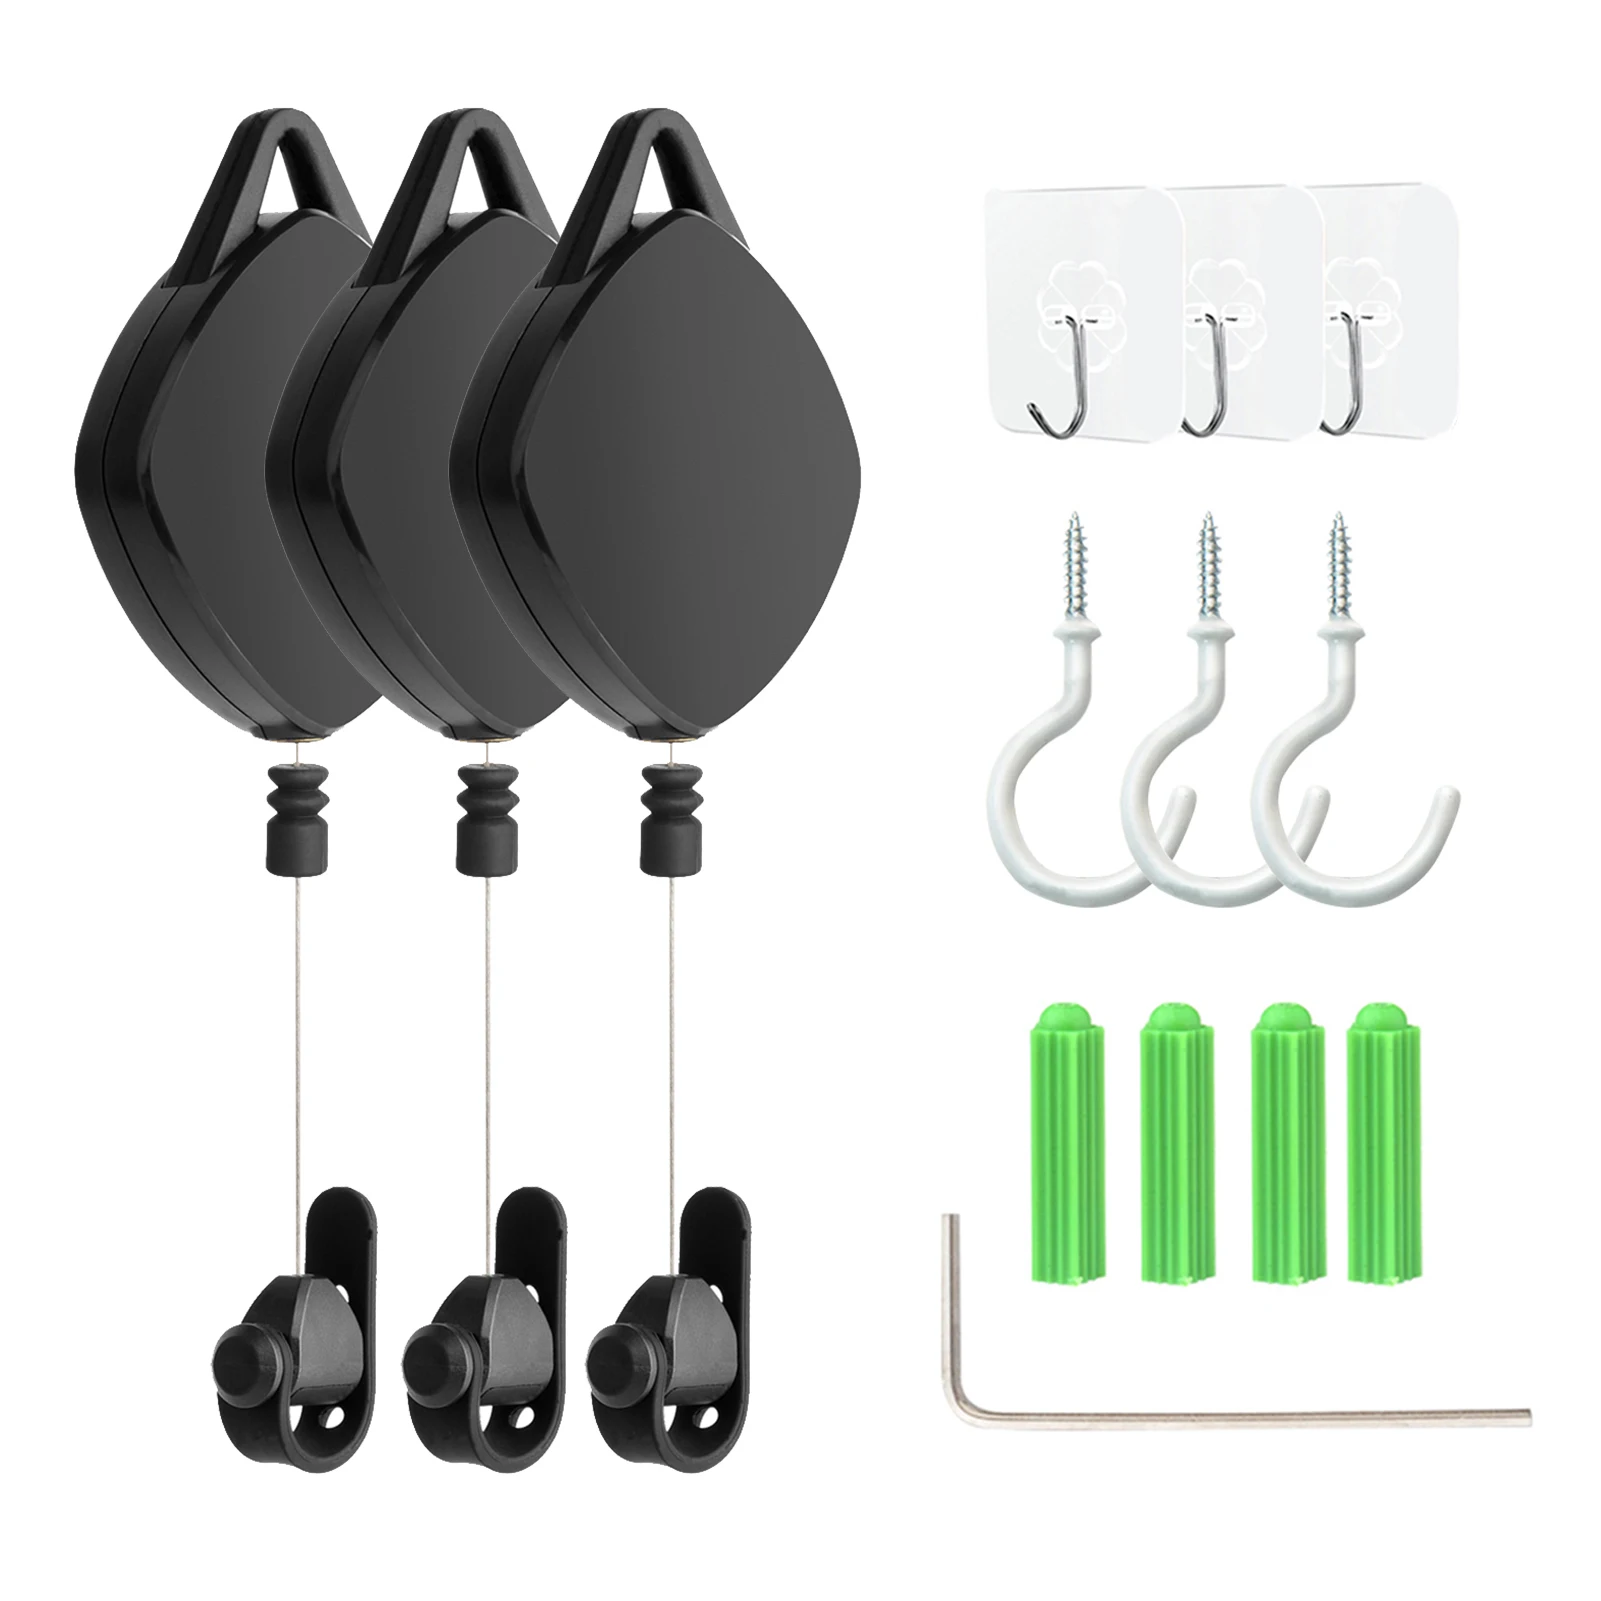 https://ae01.alicdn.com/kf/H68c7ee54f8b742679fb7b4b61bc701c0l/Cable-Management-Ceiling-Pulley-System-forOculus-Rift-S-VR-Accessories-Retractable-Practical-Headset-Parts.jpg